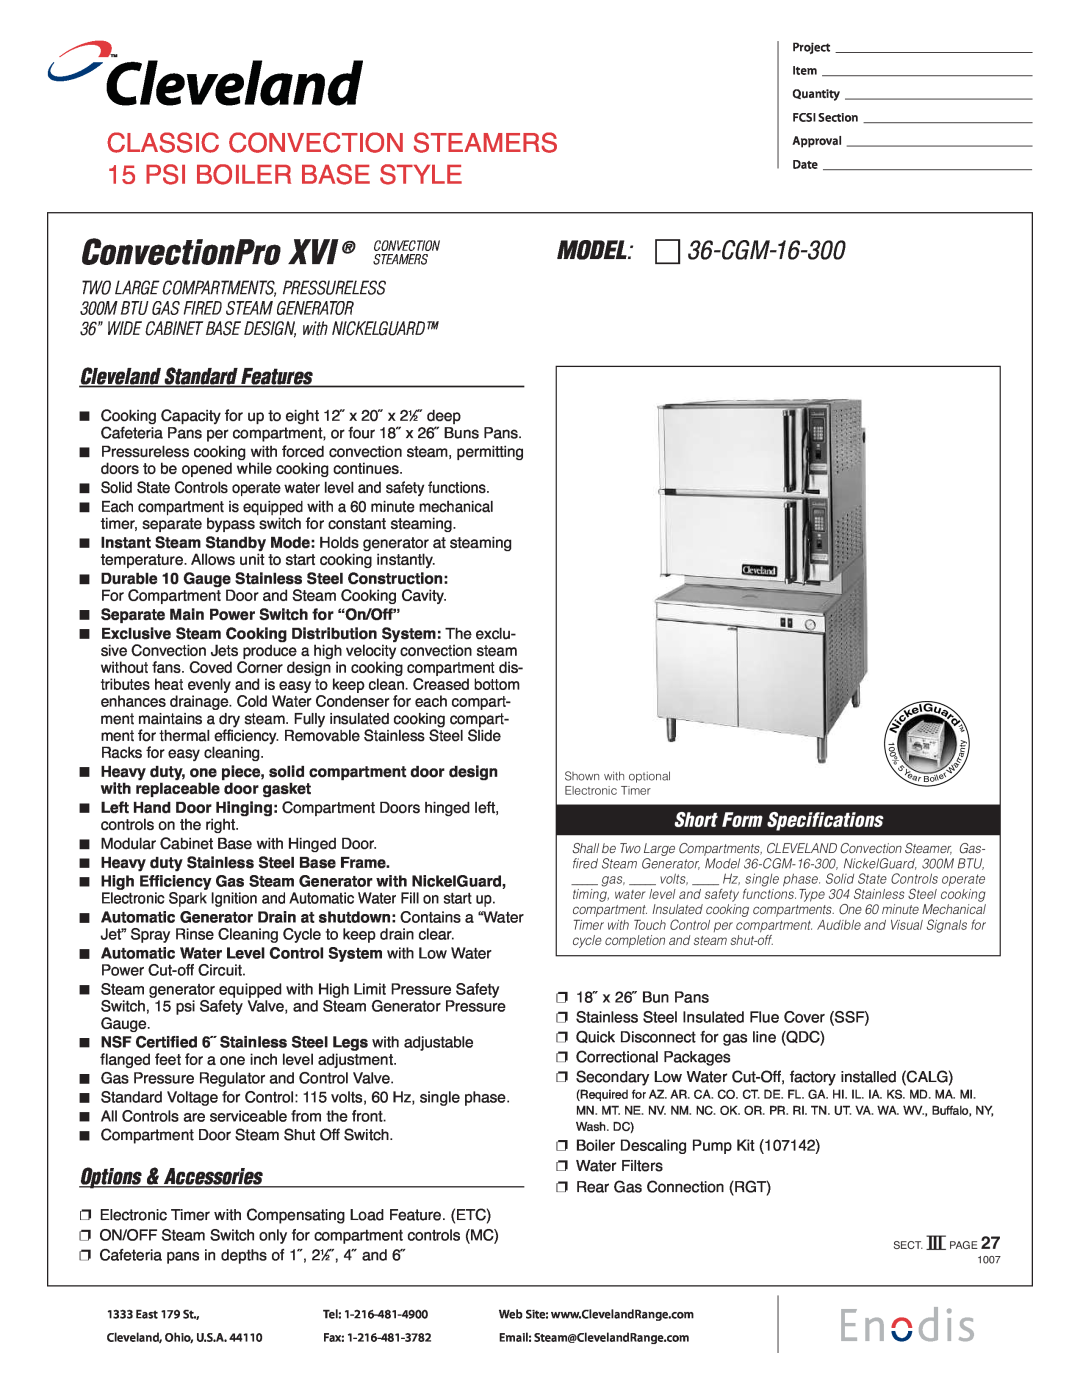 Cleveland Range specifications ConvectionPro XVI STEAMERS, MODEL 36-CGM-16-300, Cleveland Standard Features 